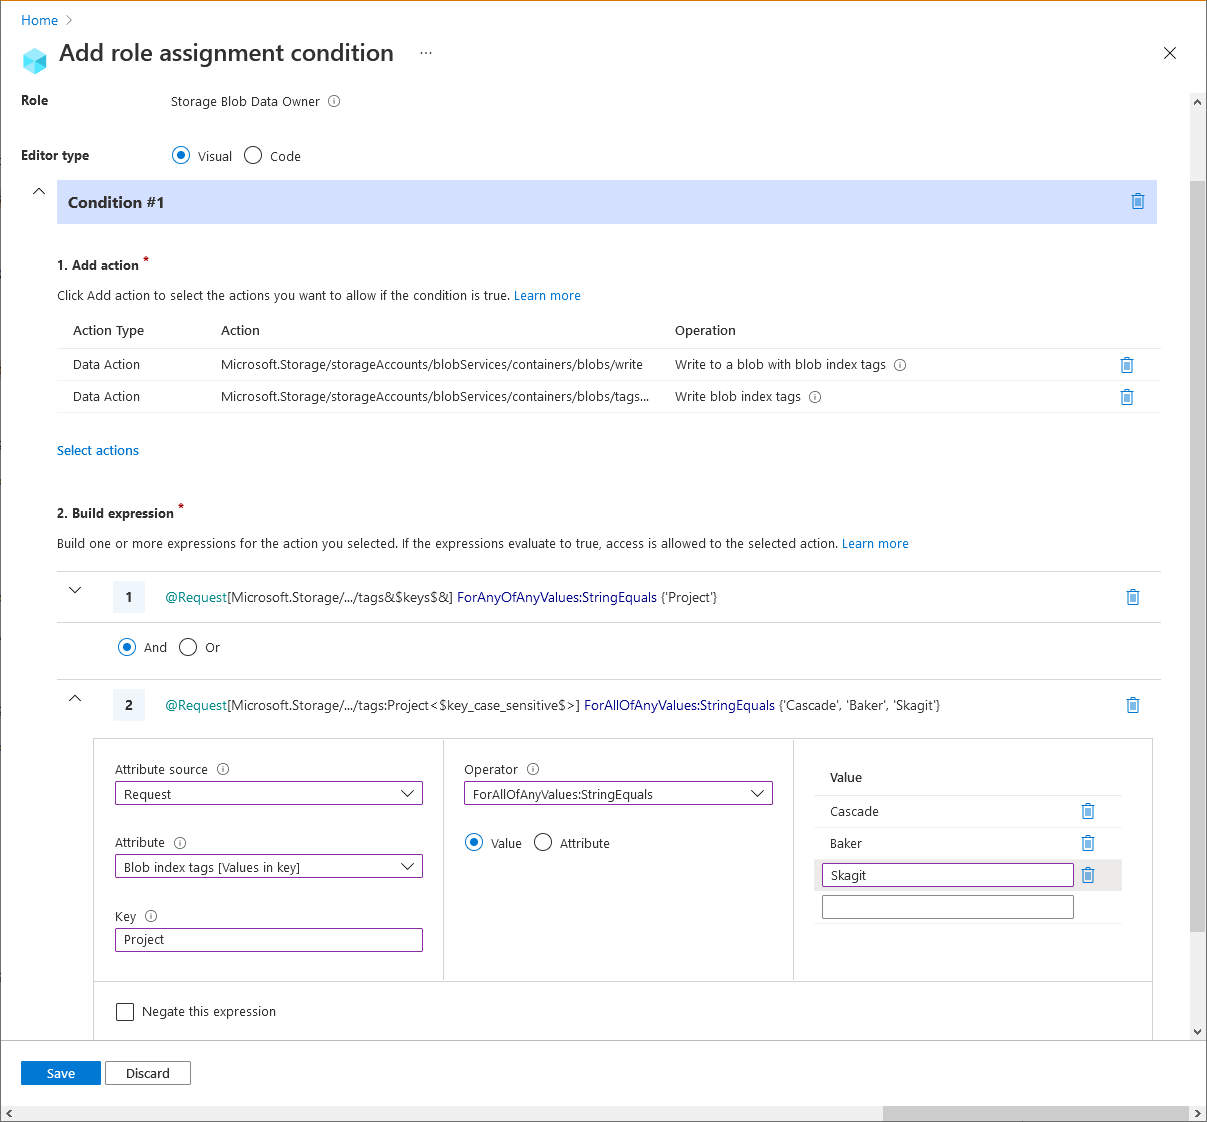 Screenshot of example 4 condition 1 editor in Azure portal.